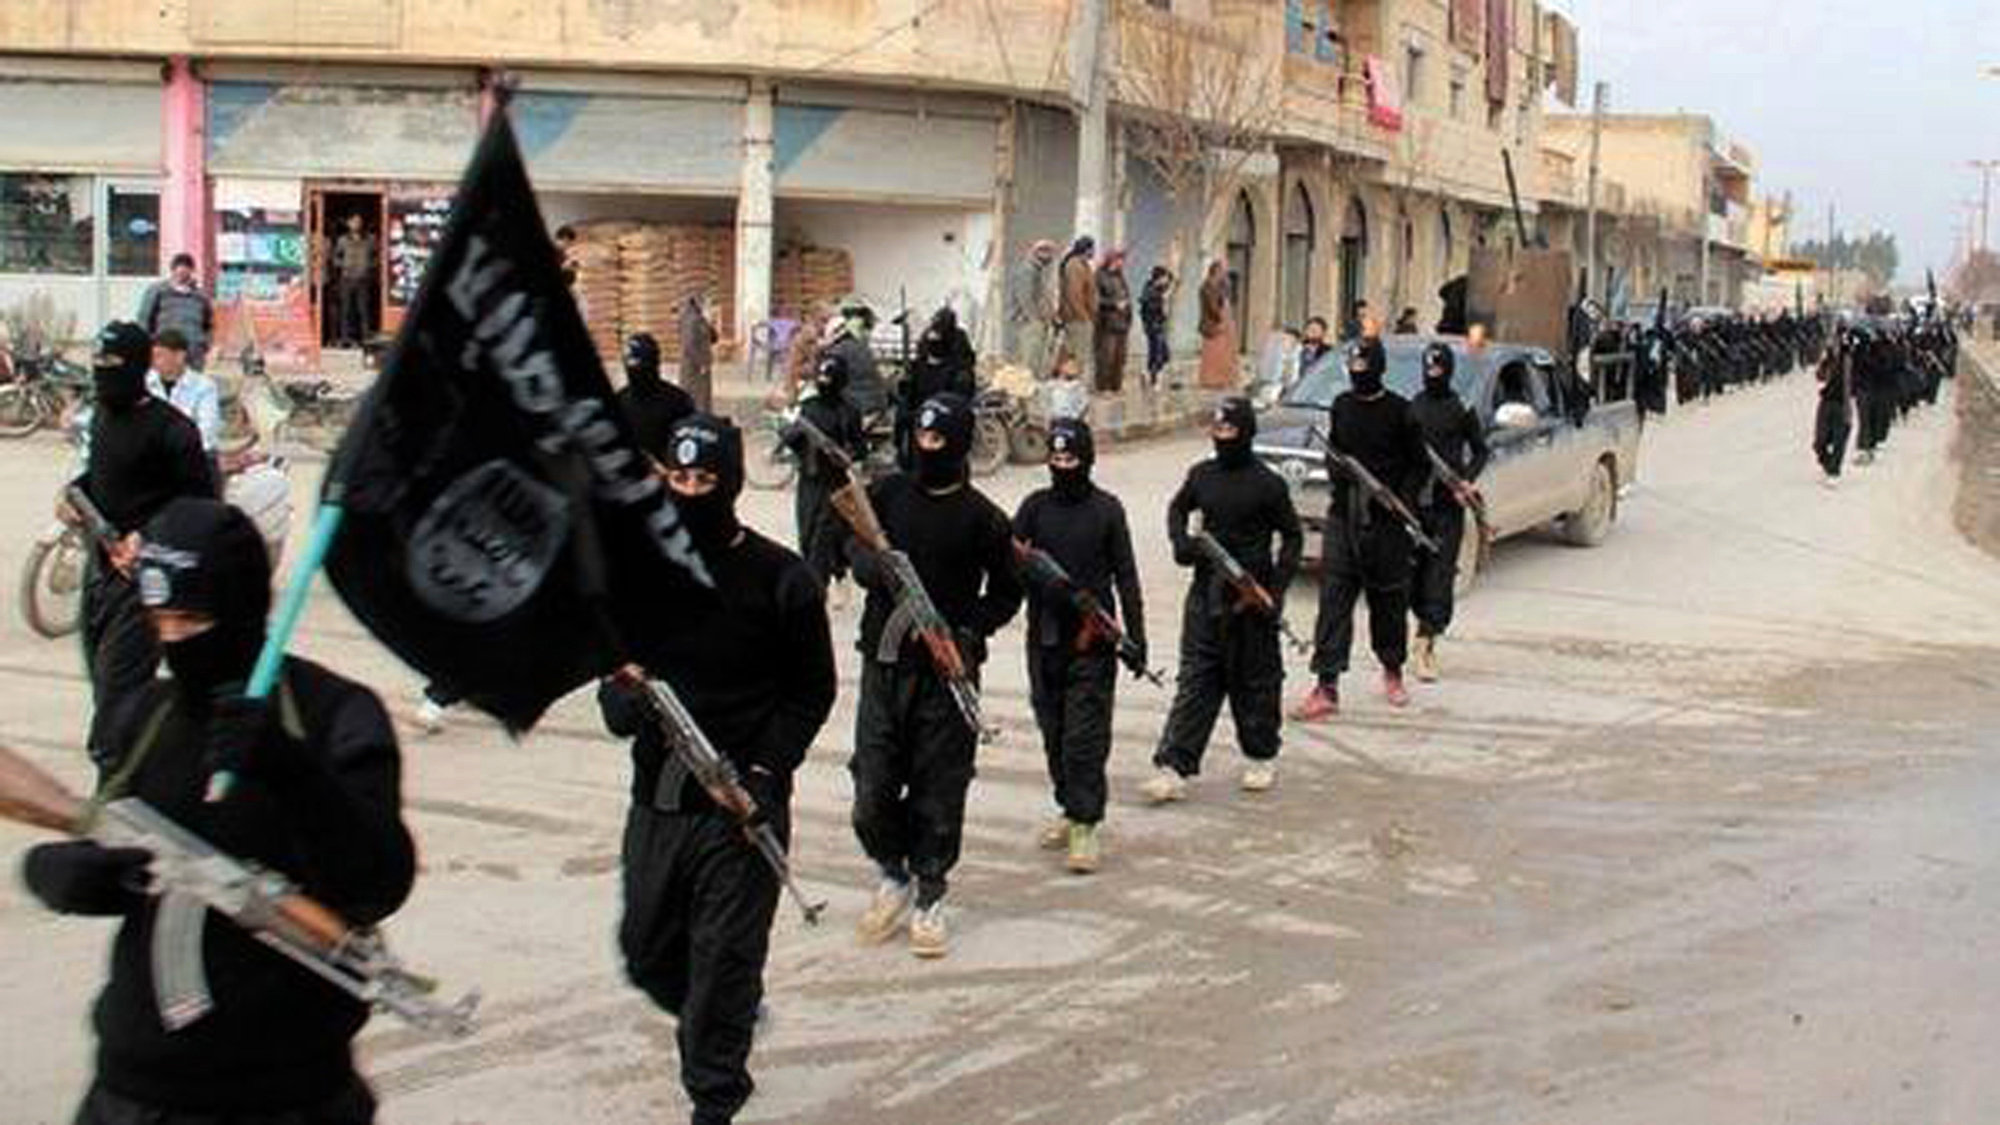 Fighters from the al-Qaida linked Islamic State of Iraq and the Levant (ISIL) marching in Raqqa, Syria